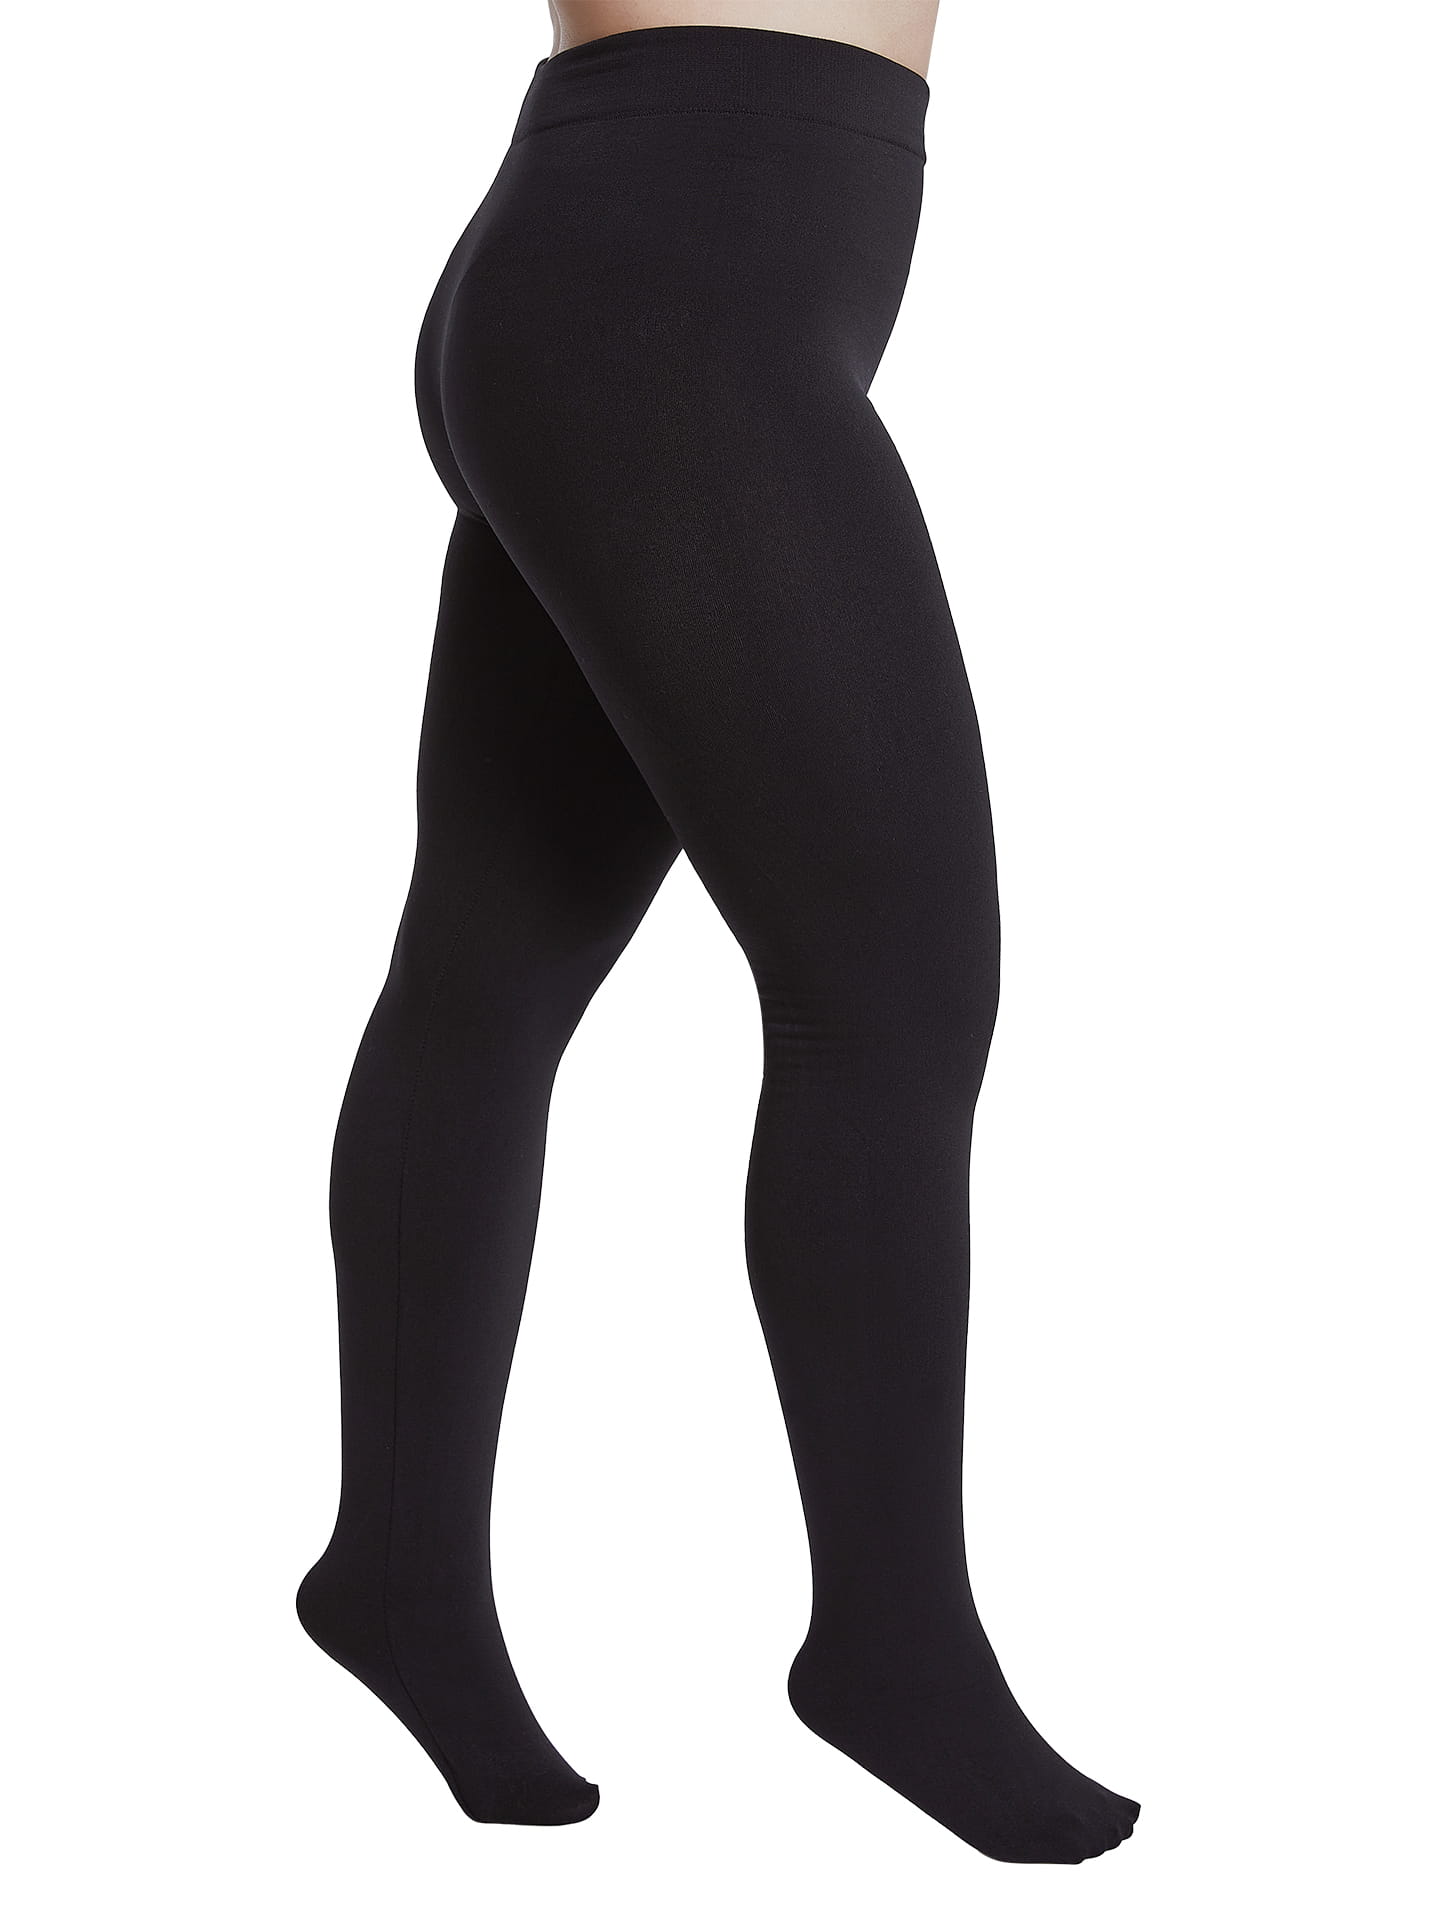 Plus size thermal tights 600den in black, 4.99€